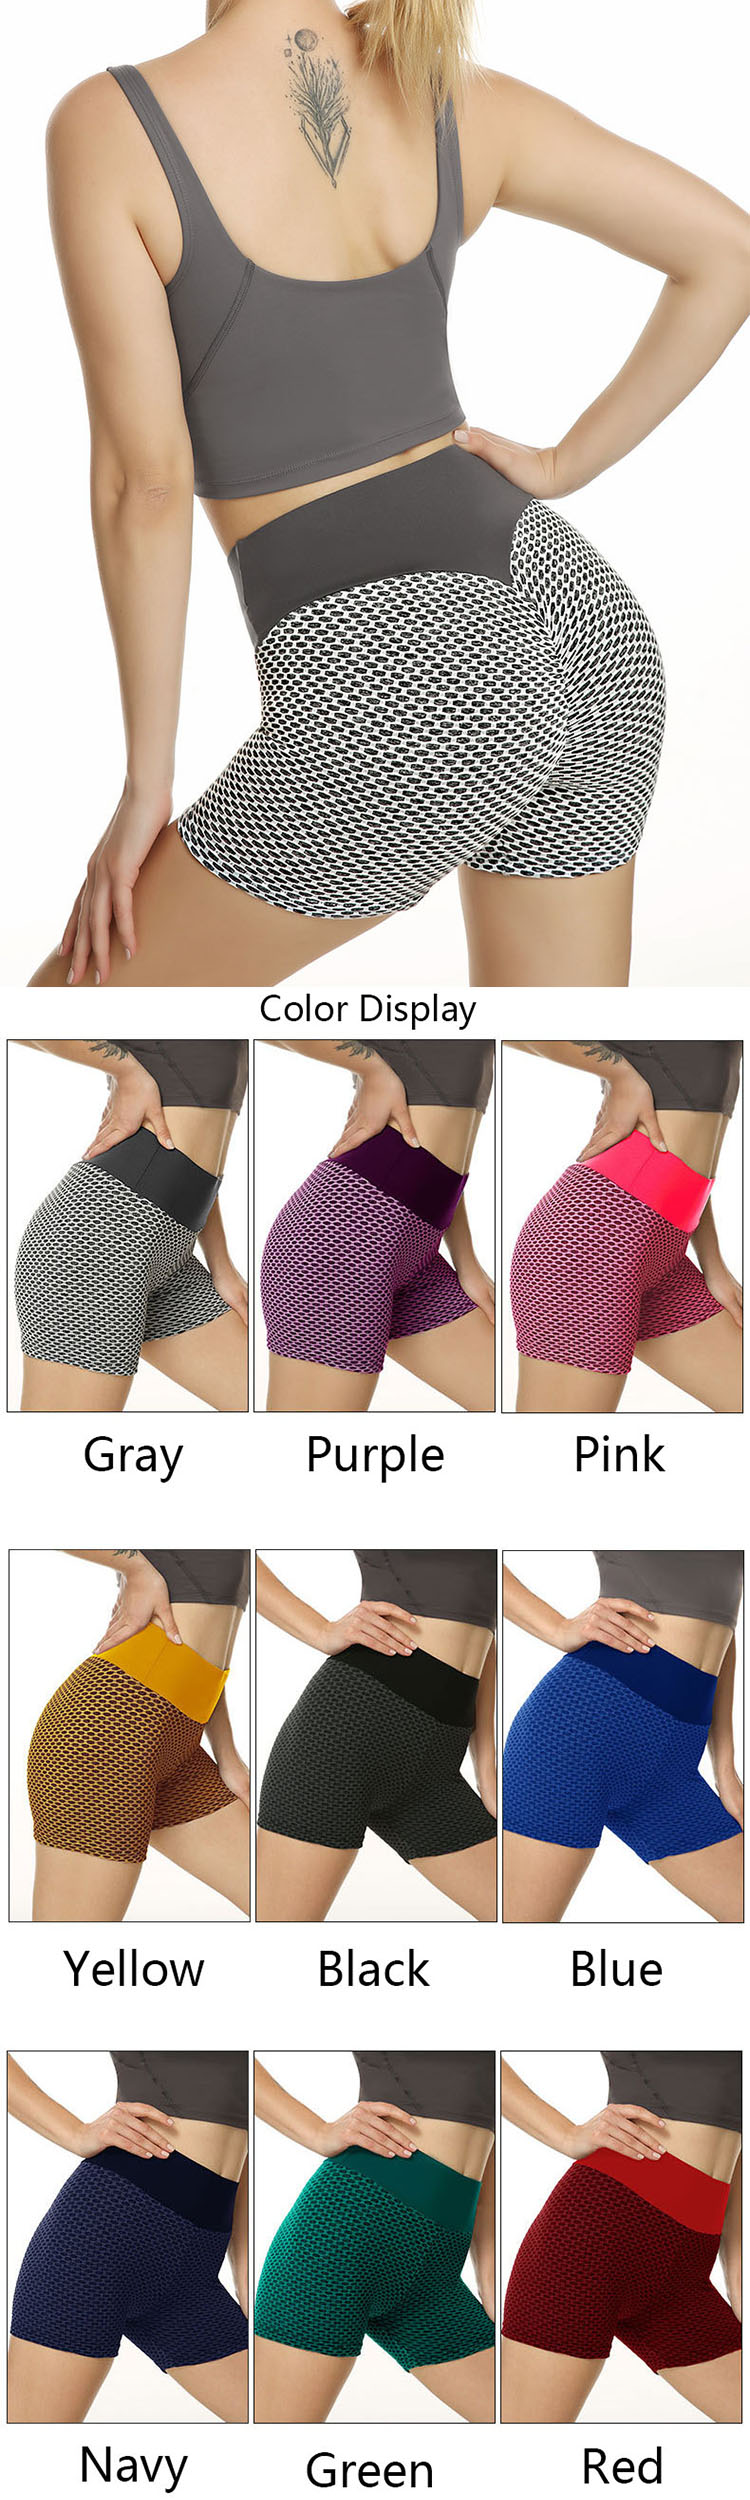 Honeycomb yoga pants is an indispensable single product in yoga fitness